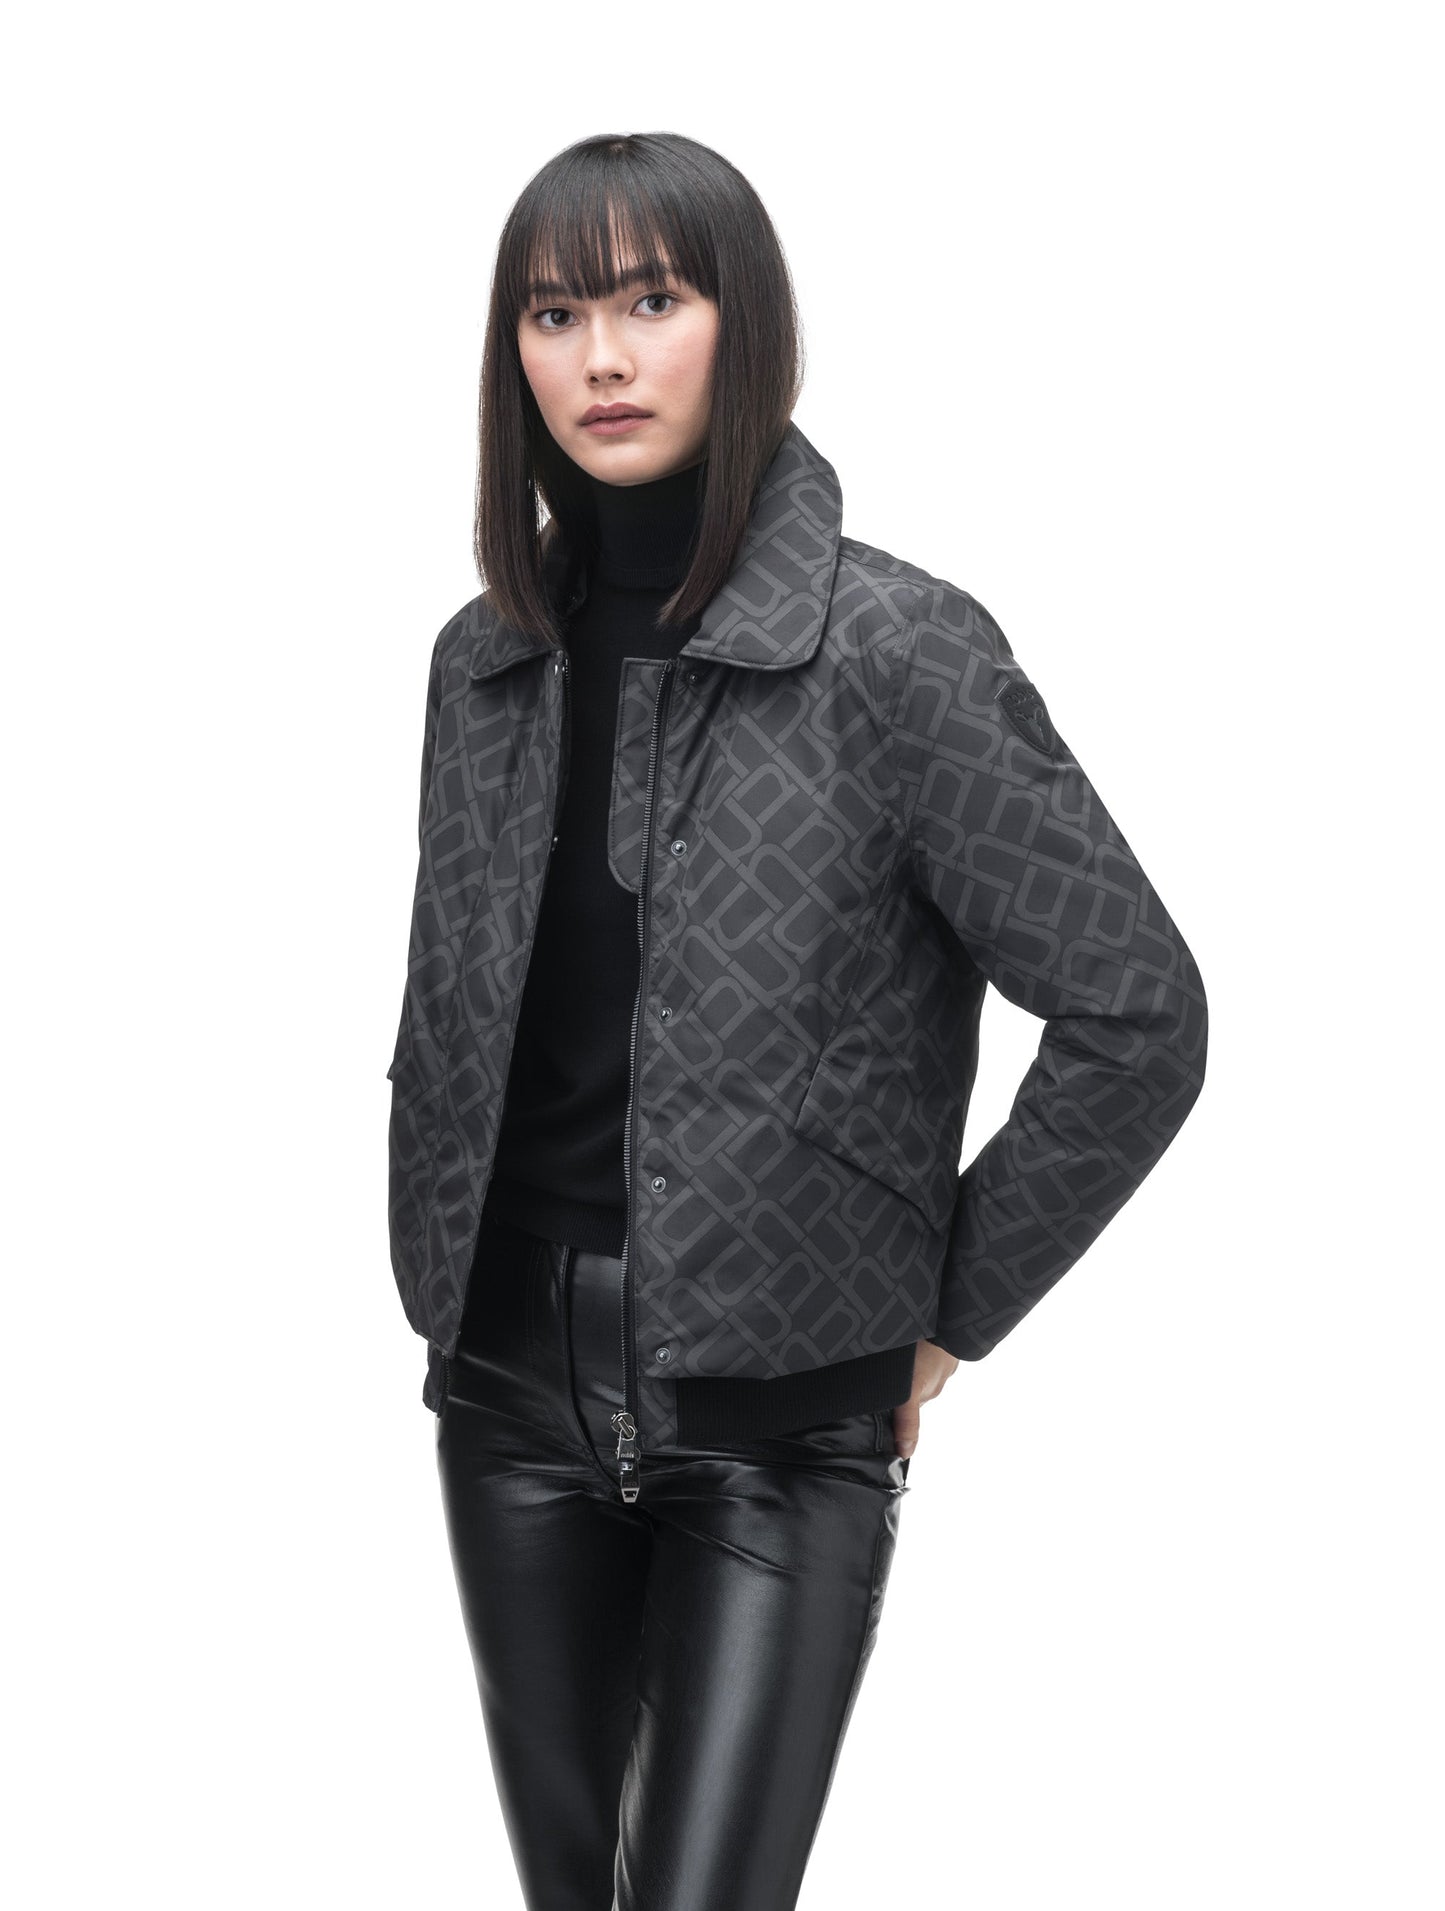 Rae Ladies Aviator Jacket in hip length, Canadian duck down insulation, removable shearling collar with hidden tuckable hood, and two-way front zipper, in Dark Monogram